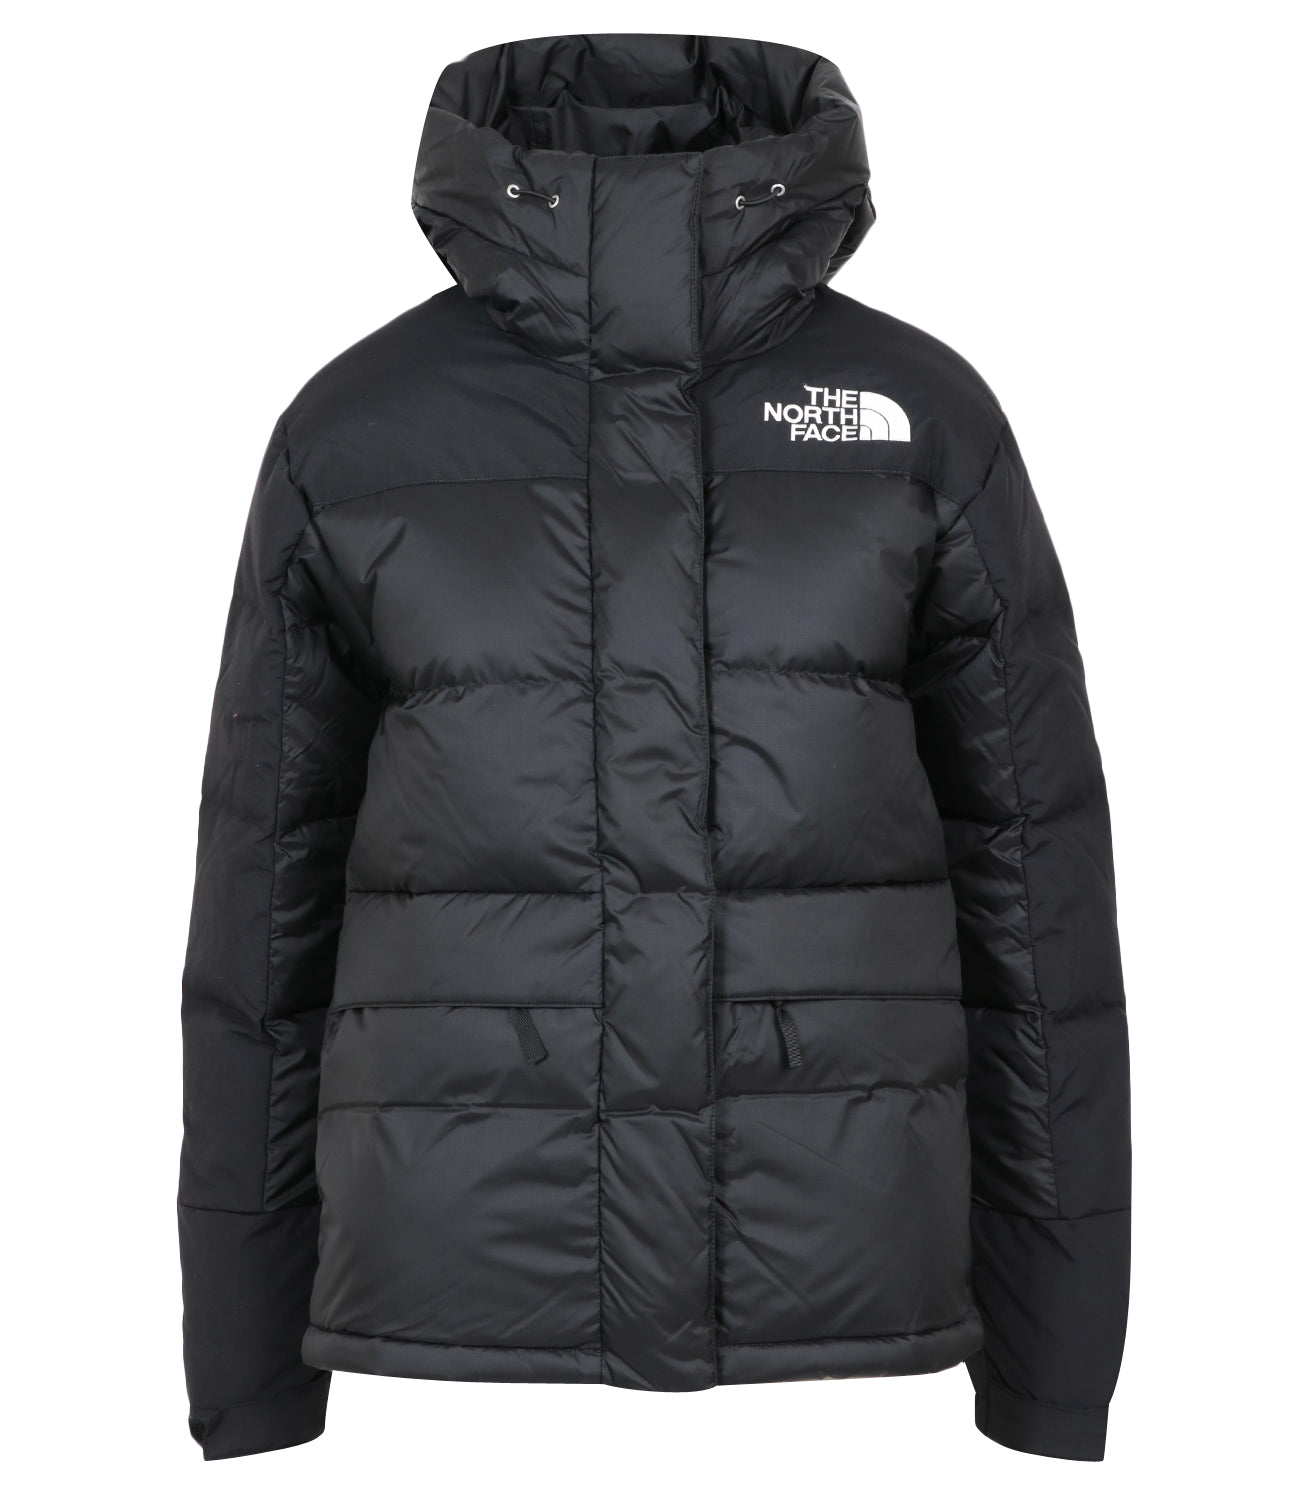 The North Face | Hmlyn Down Parka Jacket Black